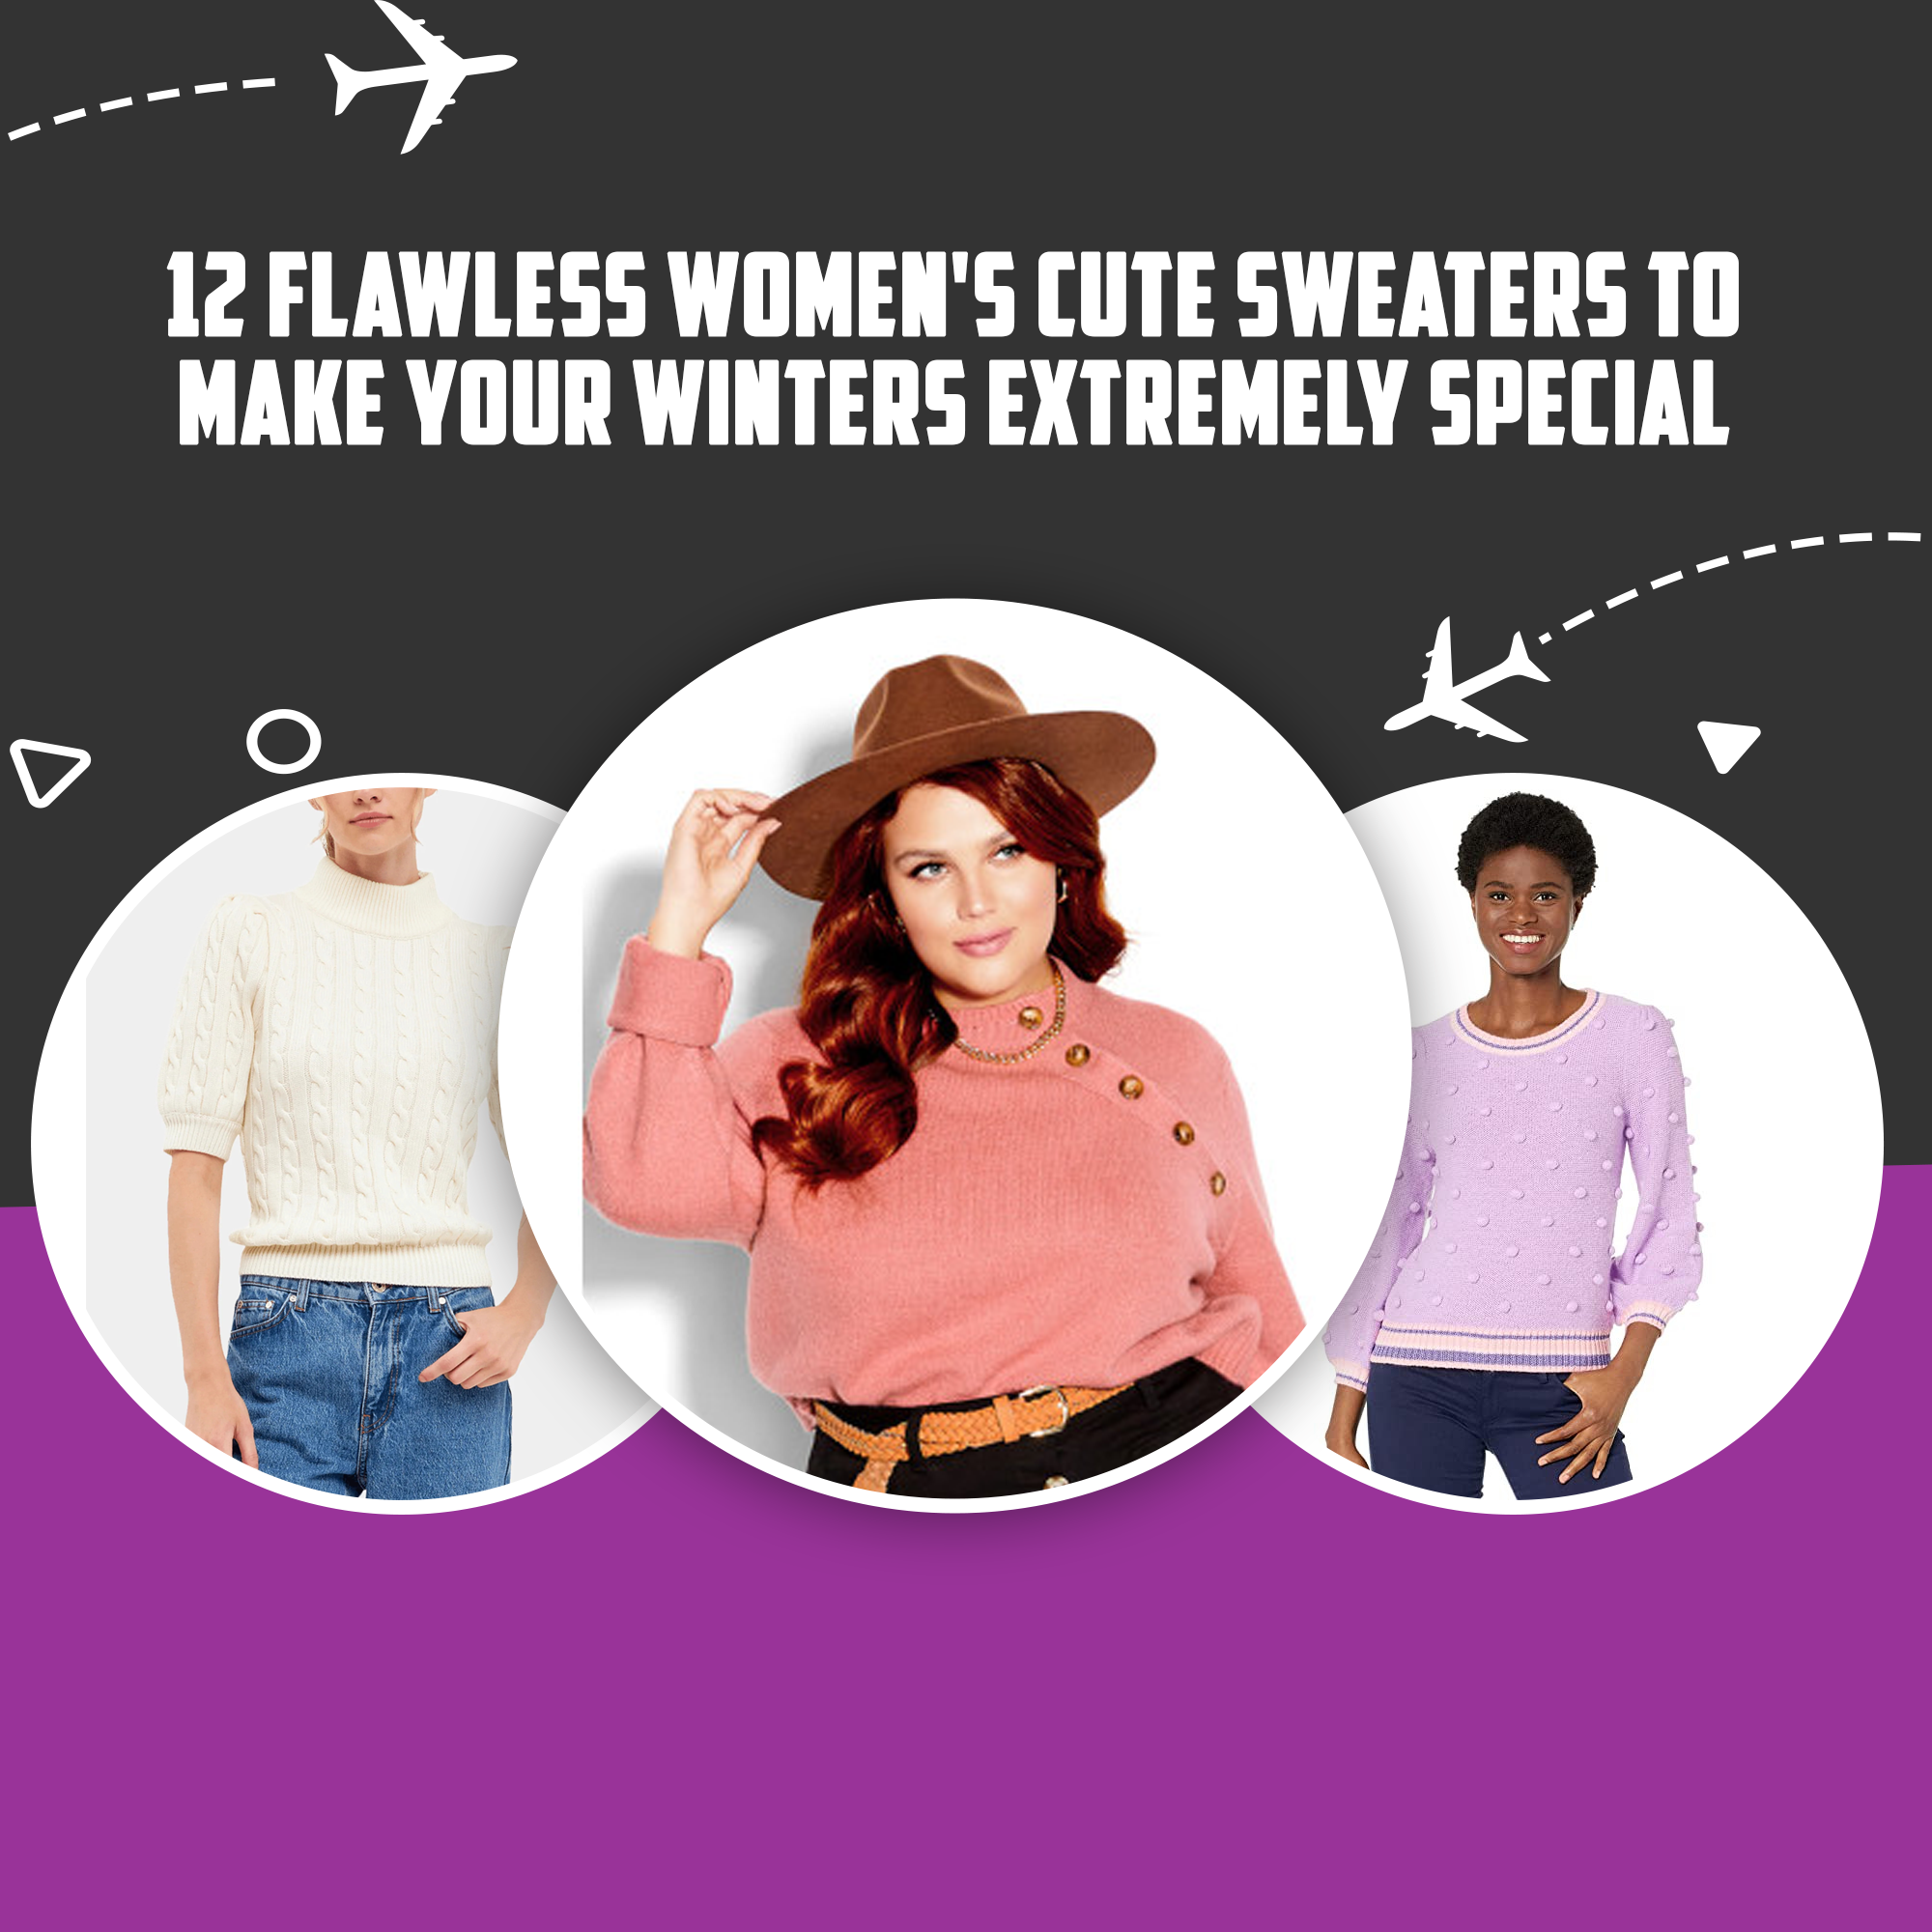 12 Flawless Women’s Cute Sweaters To Make Your Winters Extremely Special